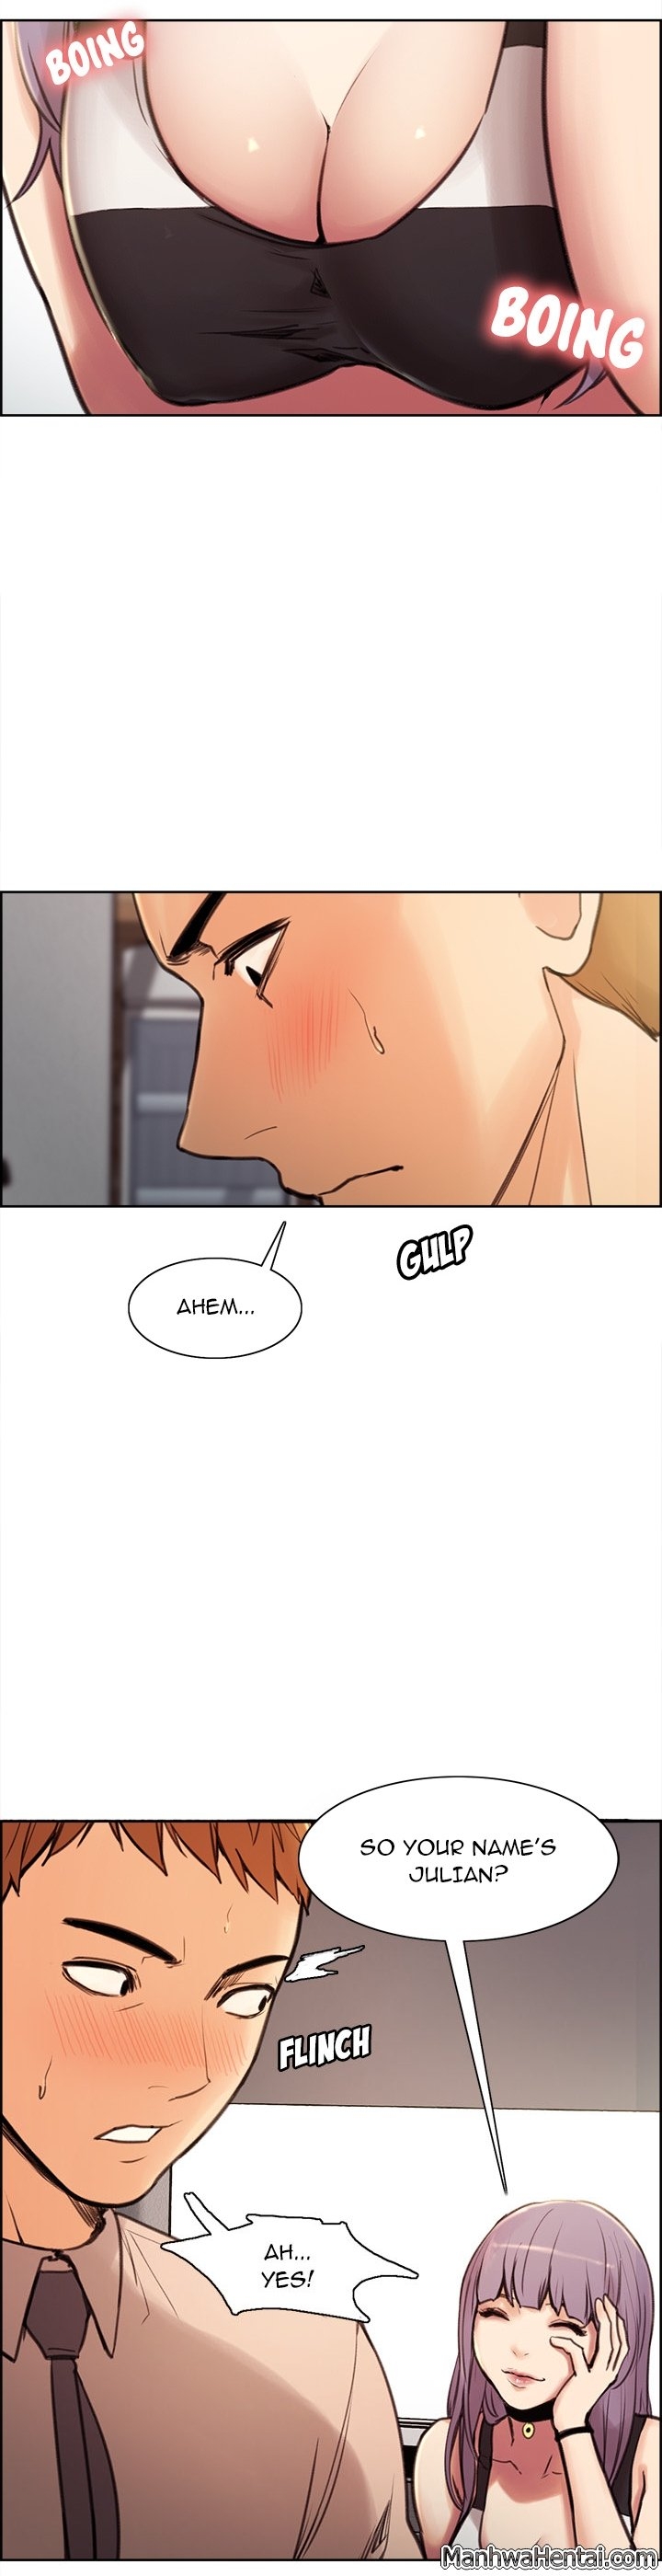 [Serious] The Sharehouse Ch. 1-11 [English] 10